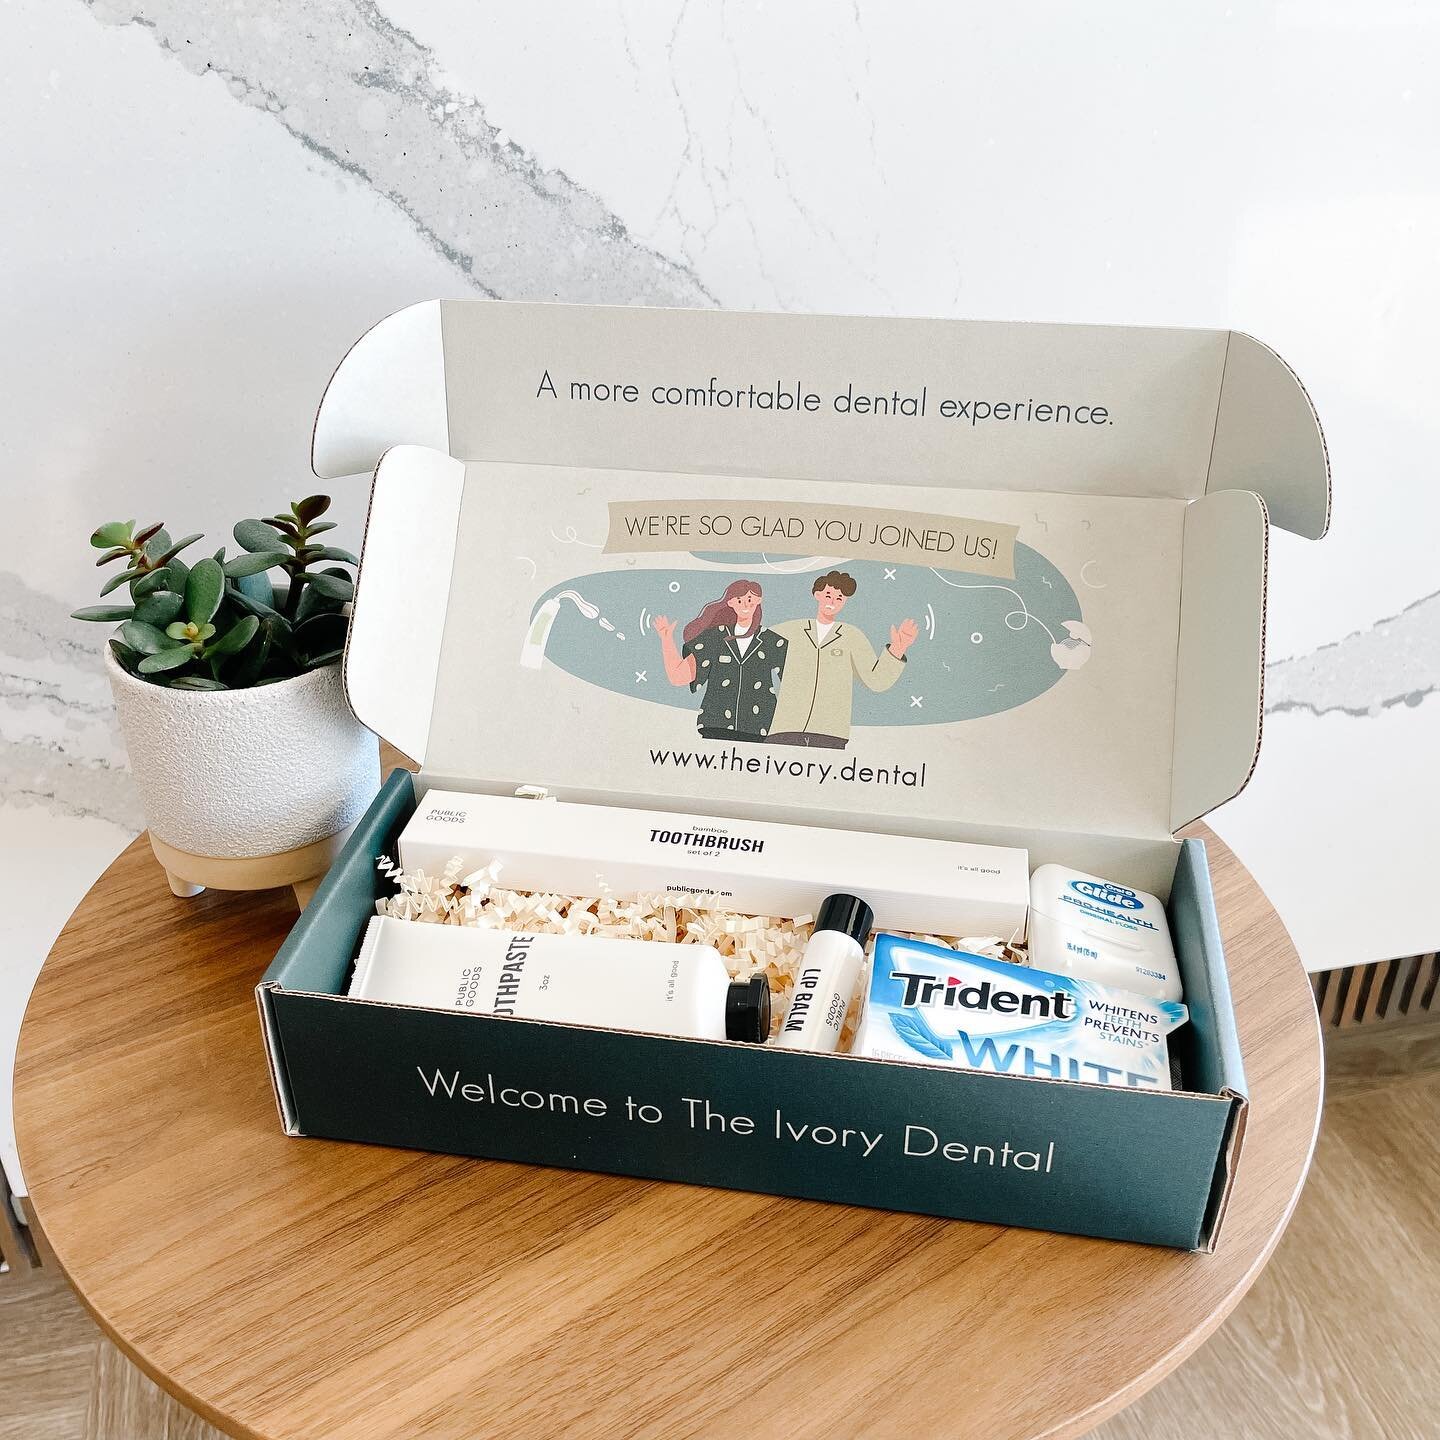 Check it out! We&rsquo;ve updated some products in our new patient amenity kits. 🦷 Every new patient gets one at their first appointment! It gives you a chance to try out new dental products to see what works best for you! | #dental #dentist #dmd #g